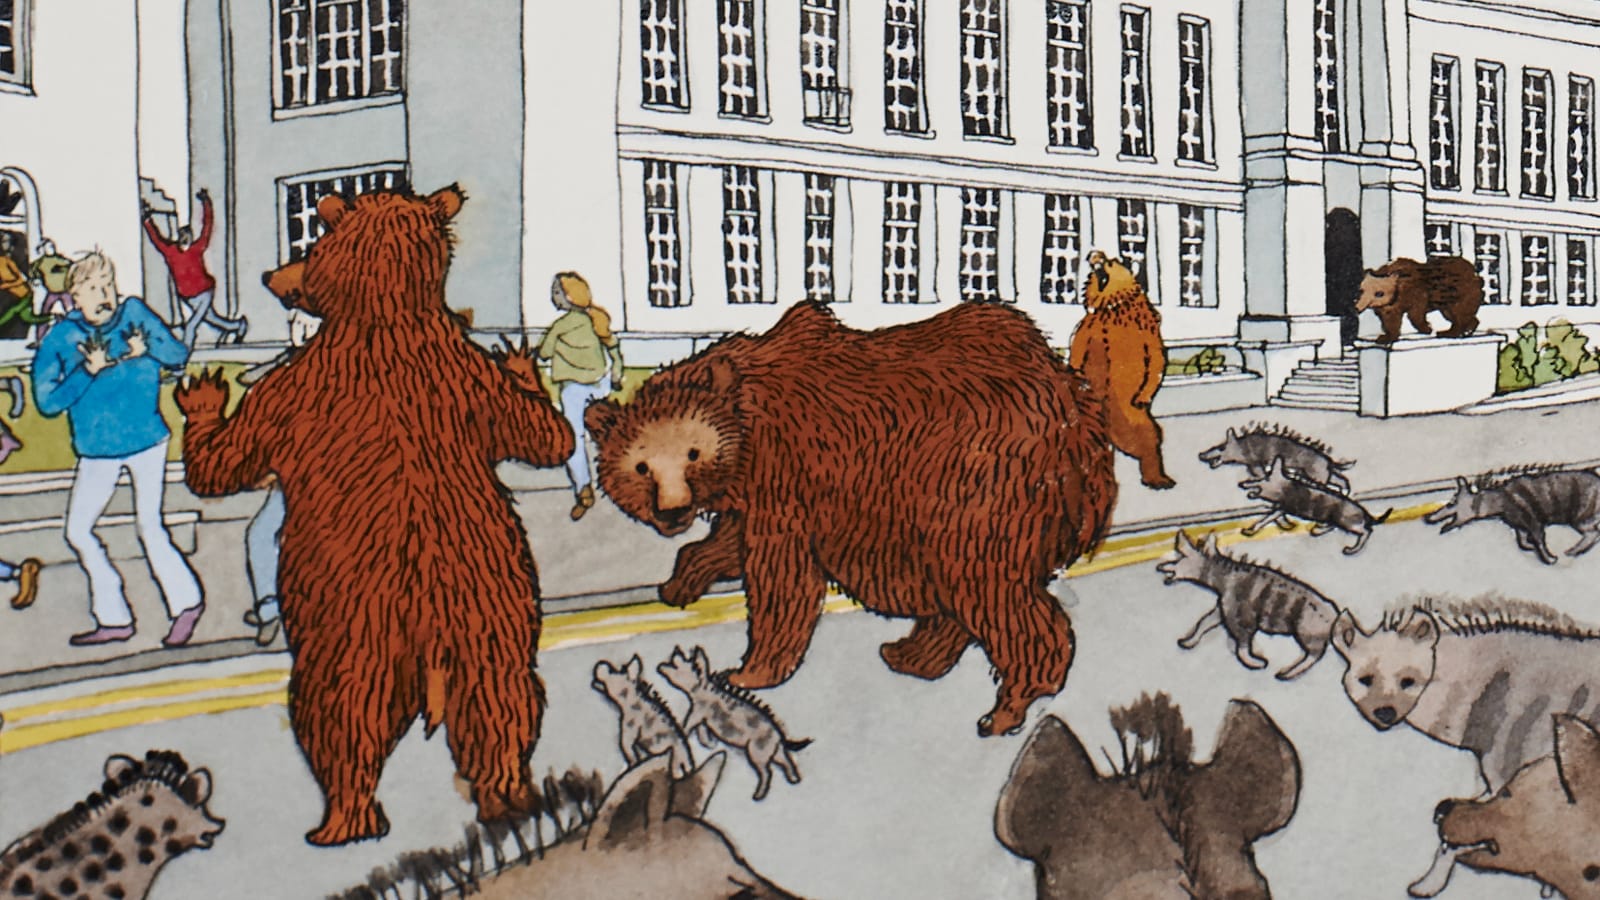 A cartoon illustration of two brown bears walking up to a white building form the University of Nottingham